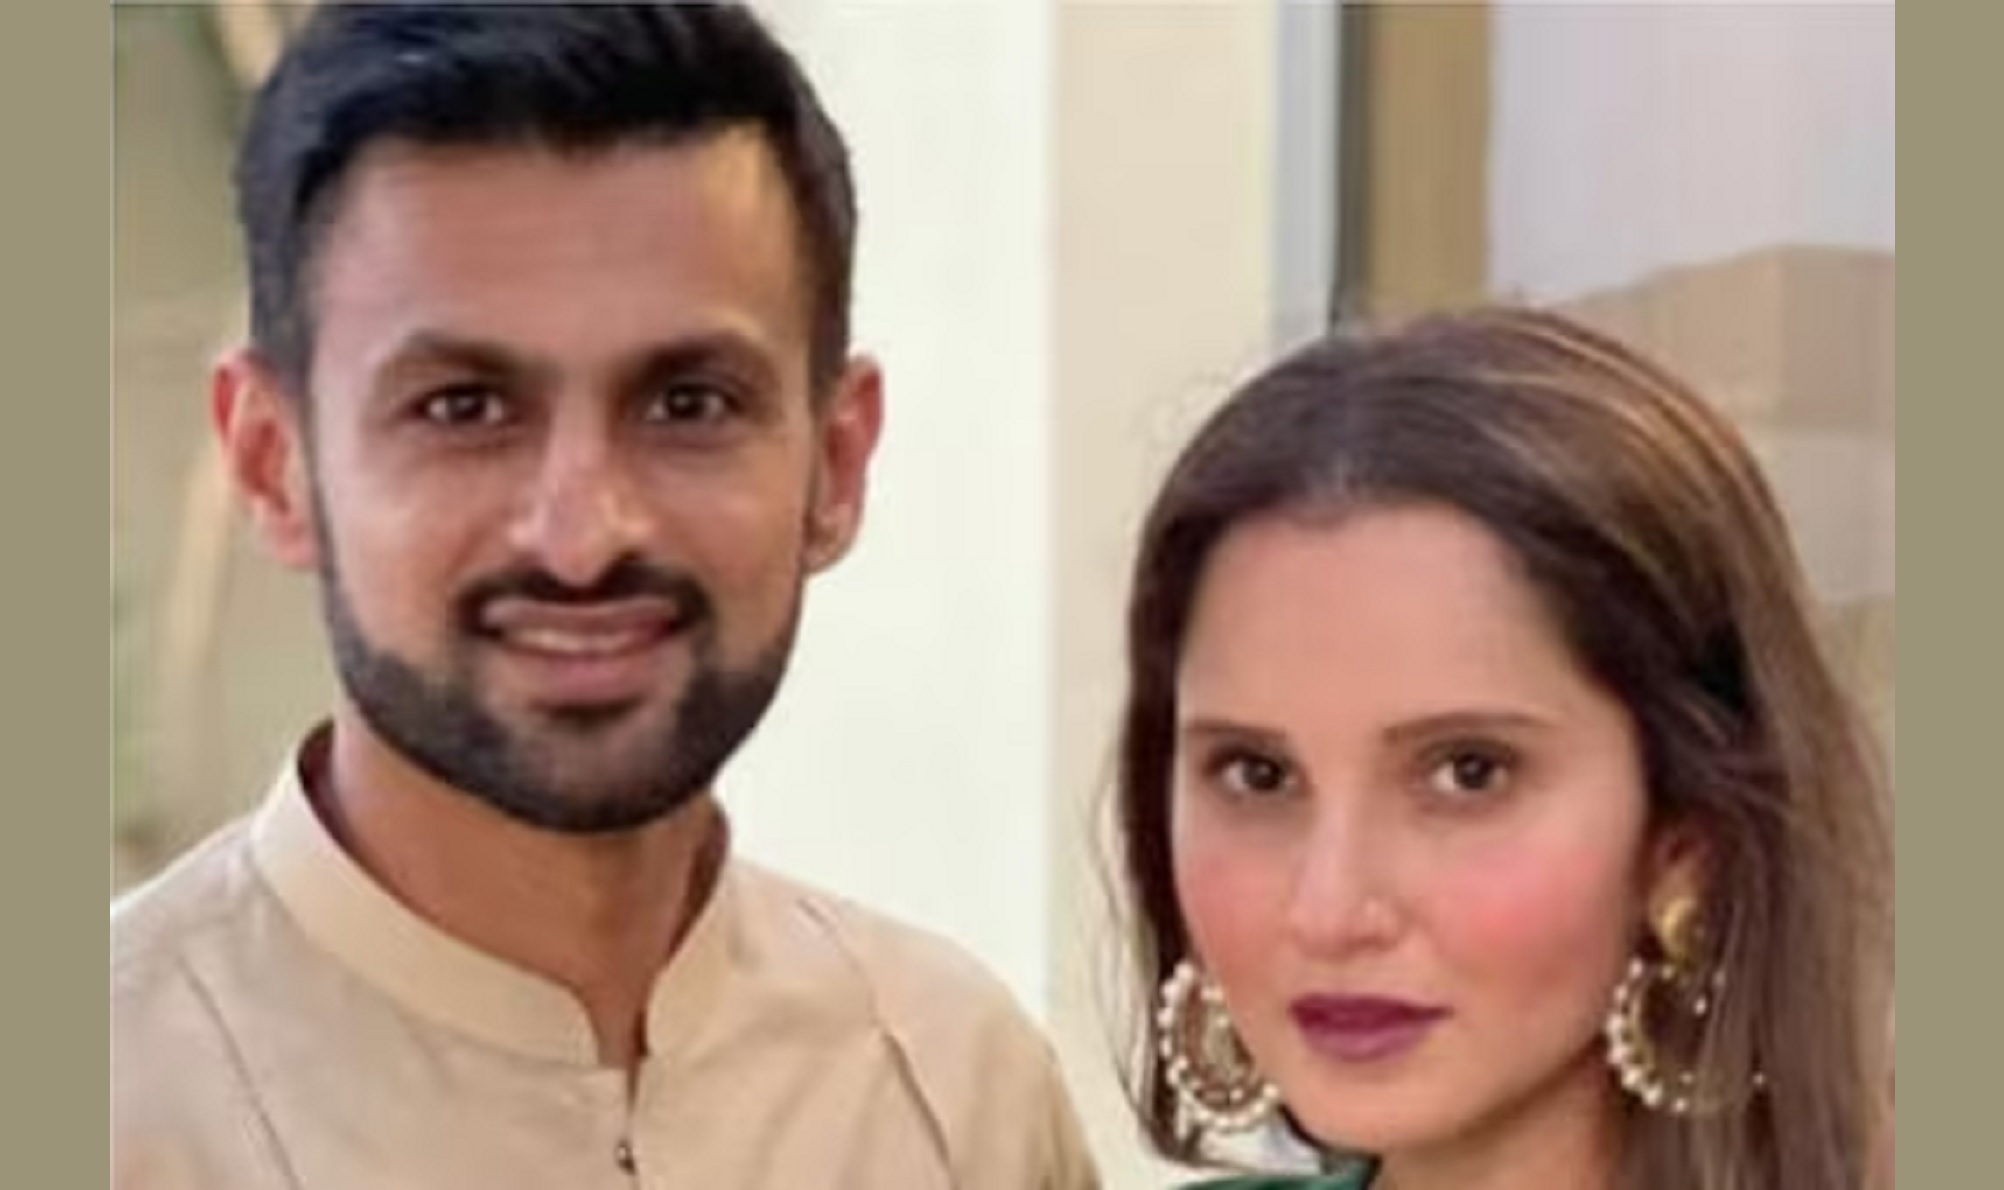 Sania Mirza And Shoaib Malik Are Divorced, As Confirmed By The Couple’s Close Friend